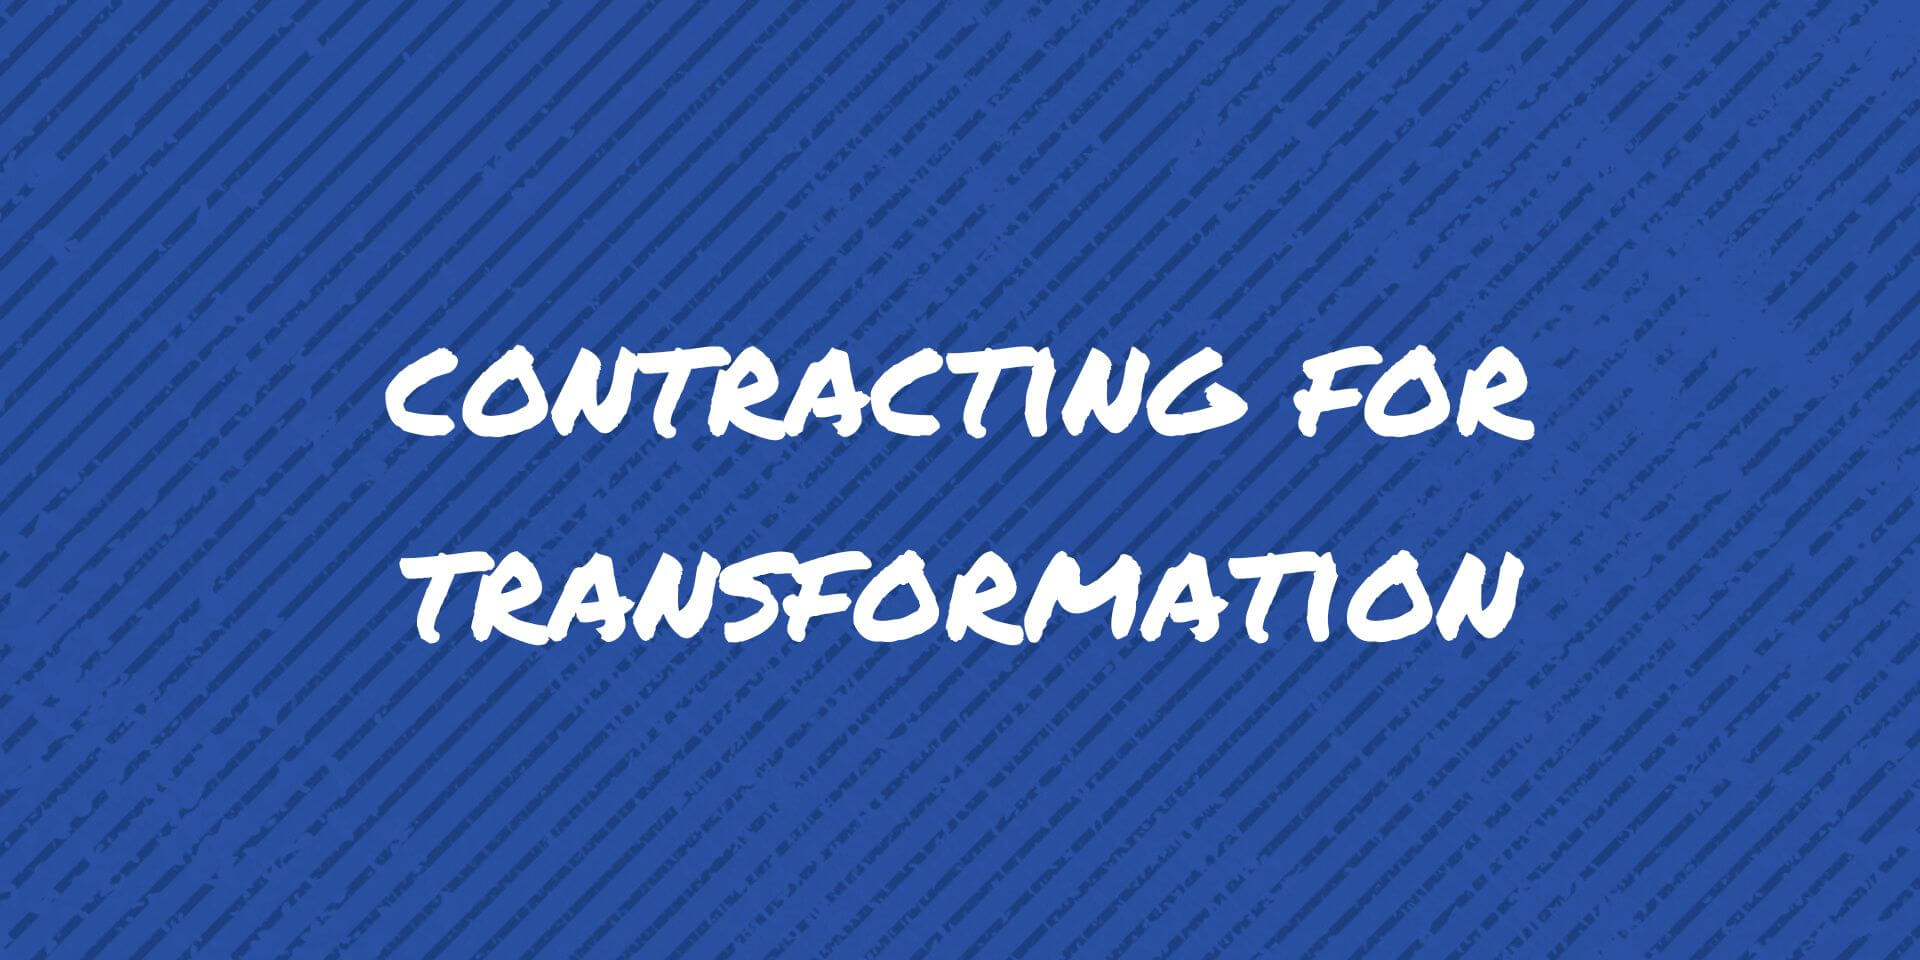 https://wellbeingblueprint.org/wp-content/uploads/2022/11/Contracting-For-Transformation.jpeg